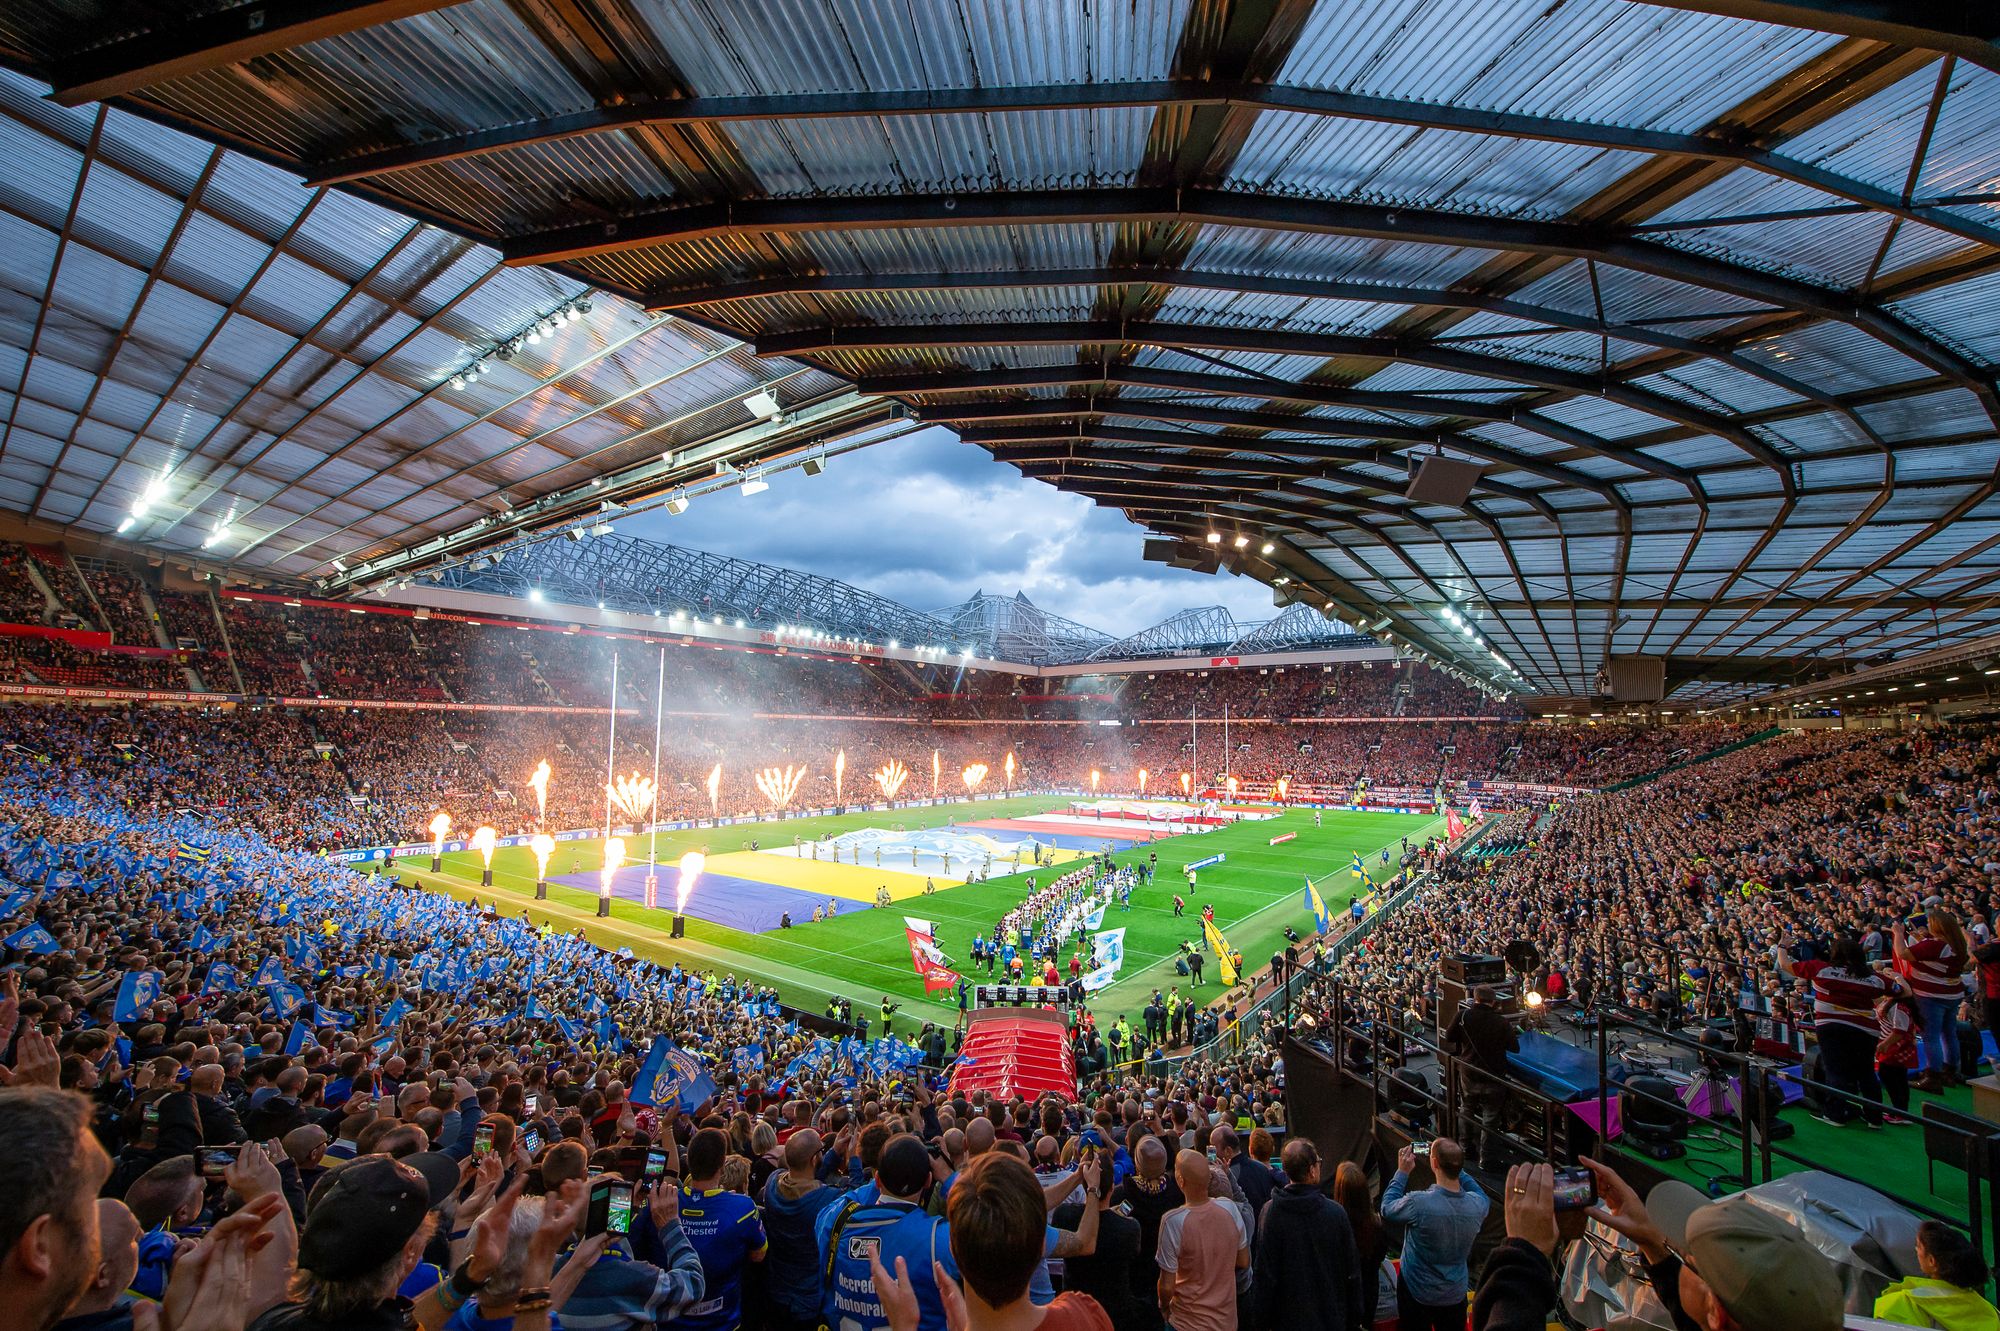 Next up in England, the rescheduled Rugby League World Cup 2021